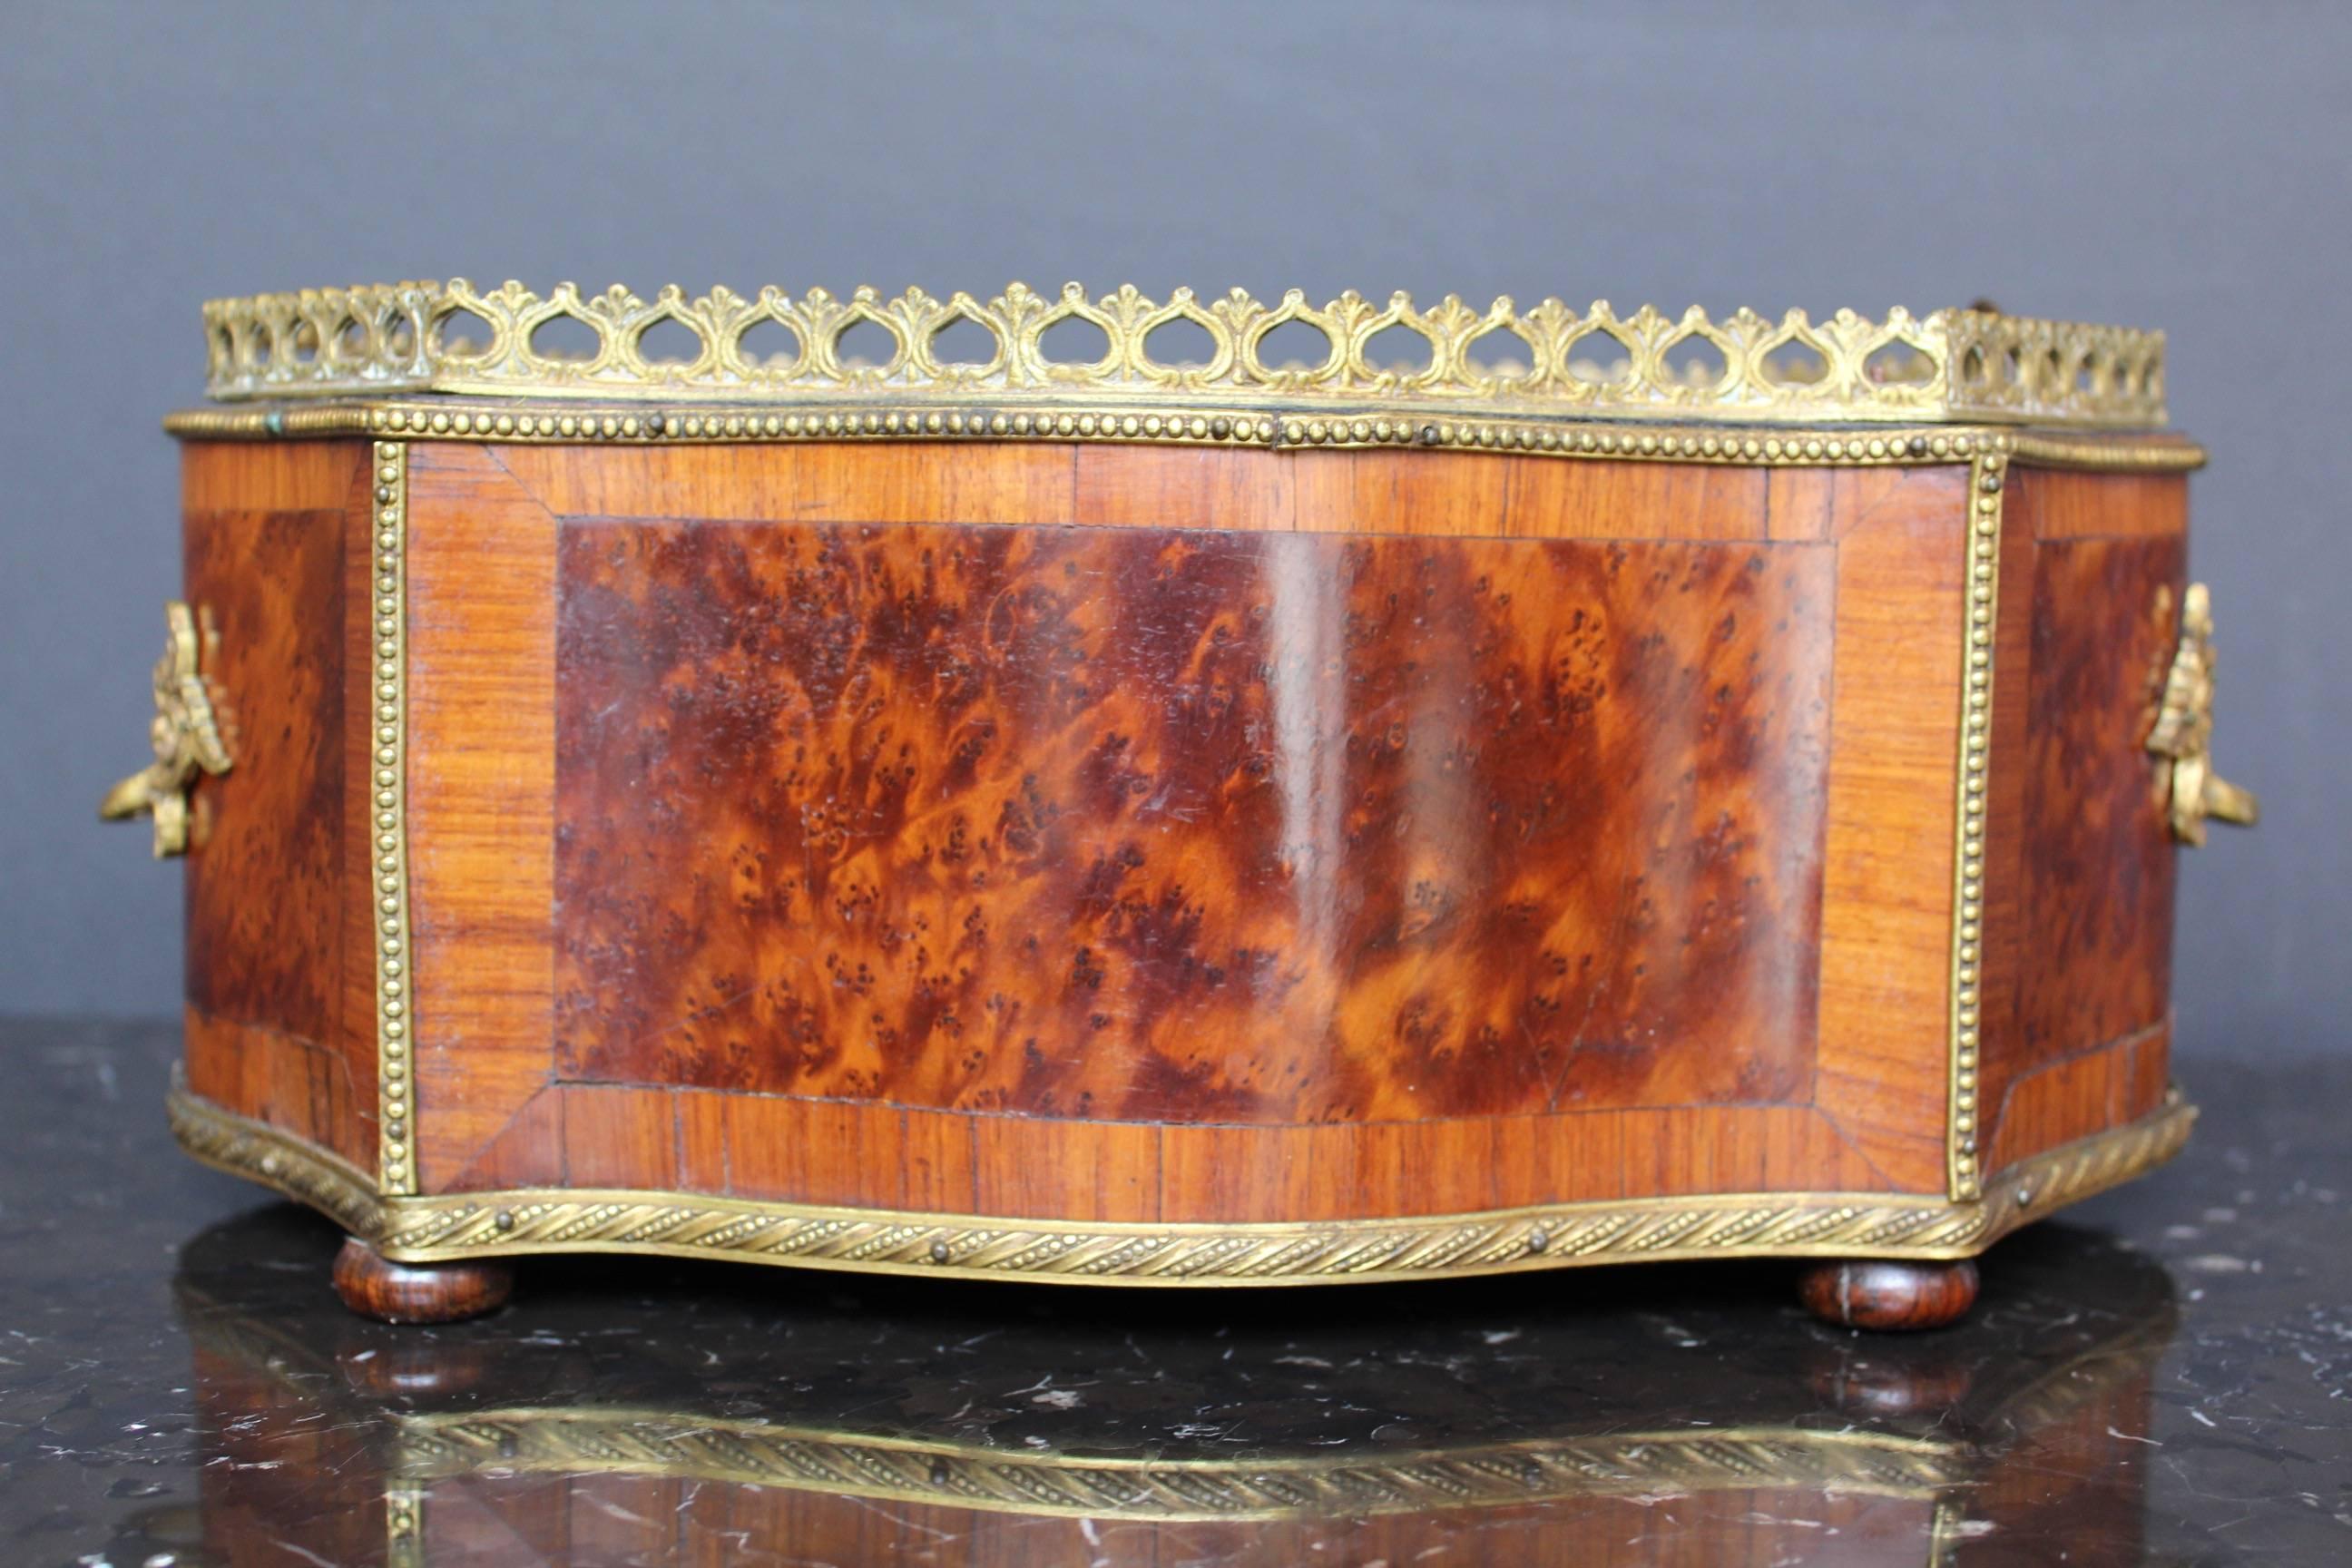 Elegant with its violin shape Napoleon III planter featuring a gilded bronze gallery at top, rows of gilded brass pearls and pair of handles. Great patinated burr walnut marquetry on all sides. Rest on four small wooden bun feet. Comes with its